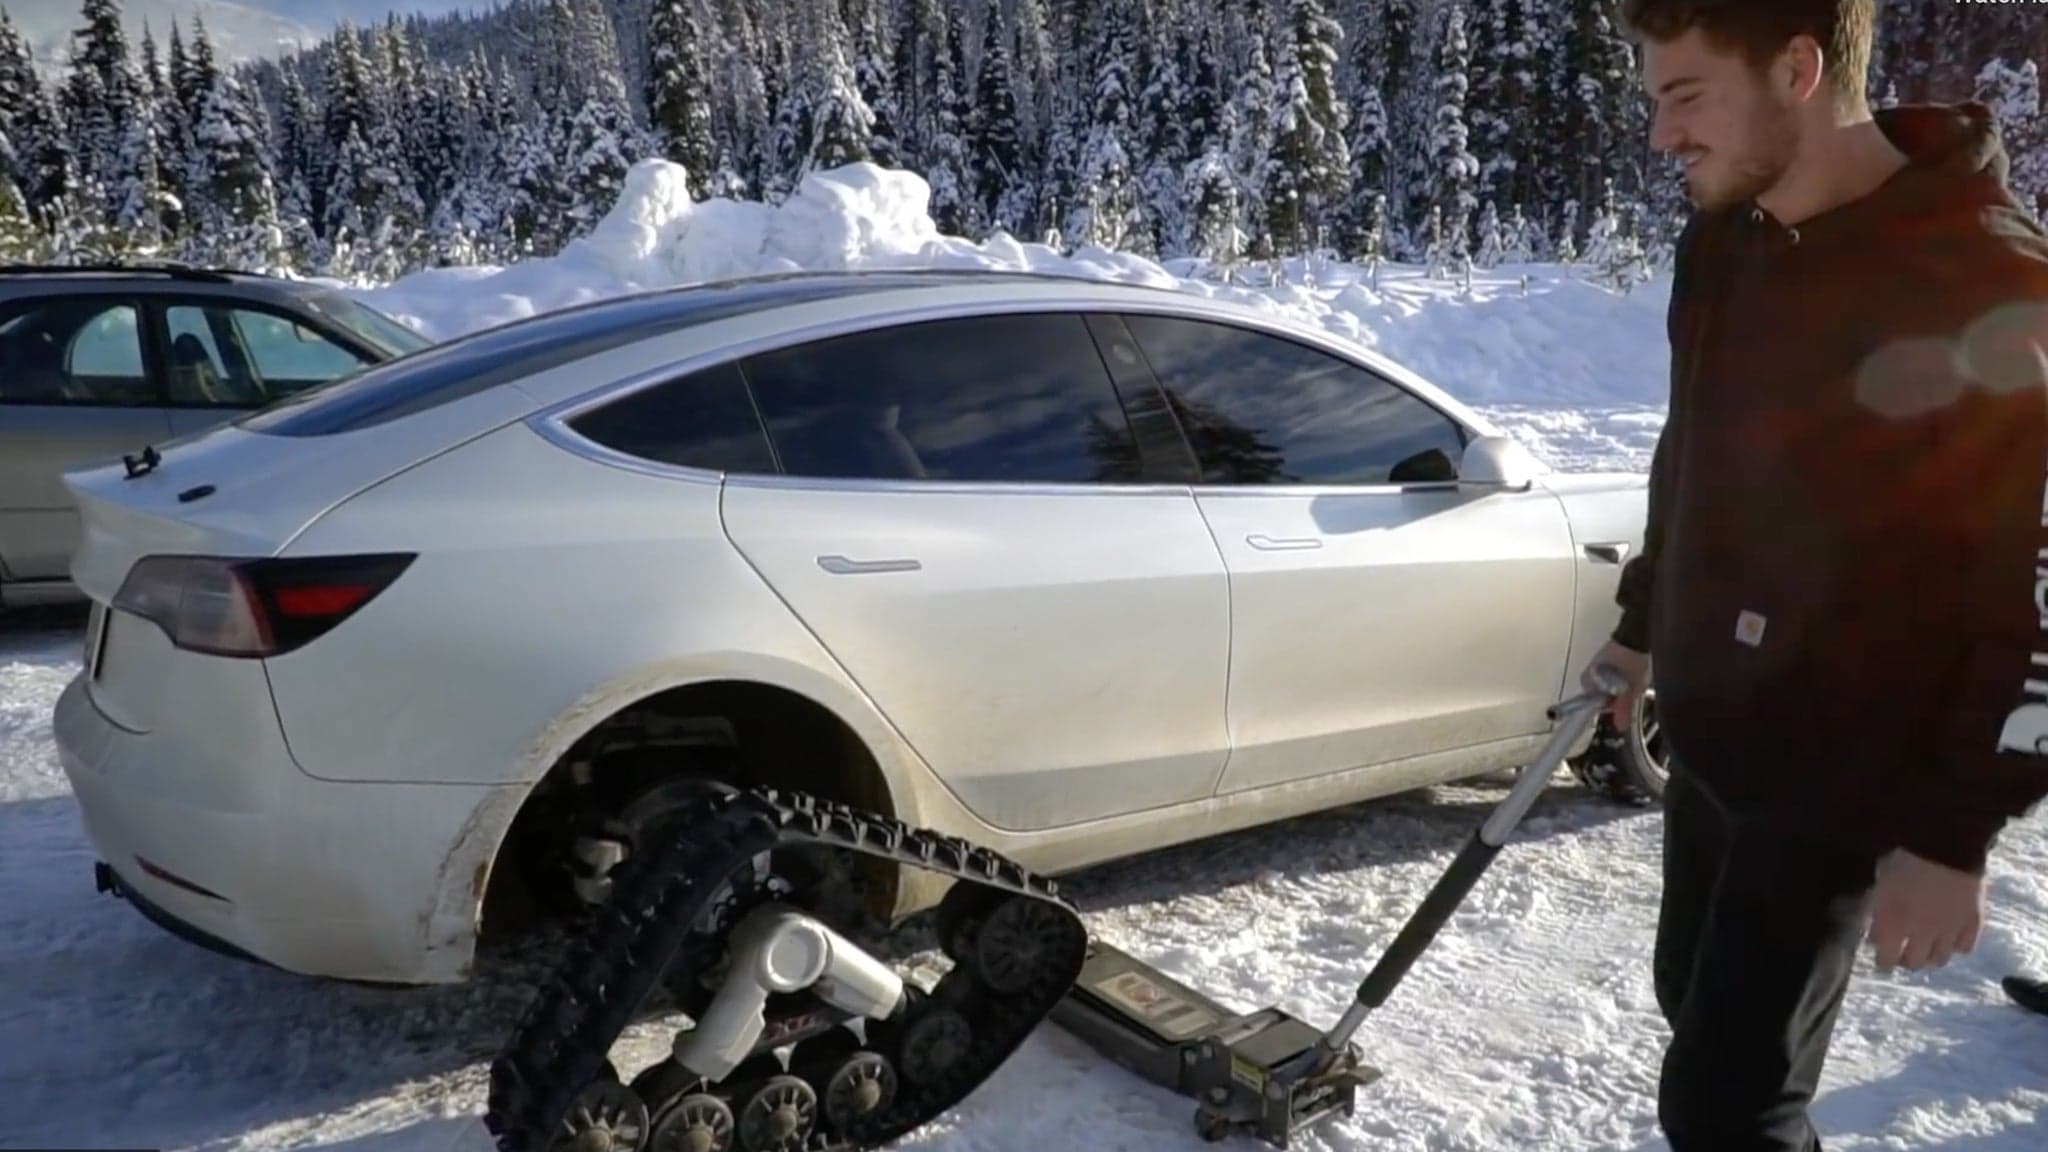 Tank Tracks Turn the Tesla Model 3 Into a Surprisingly Capable Off-Roader